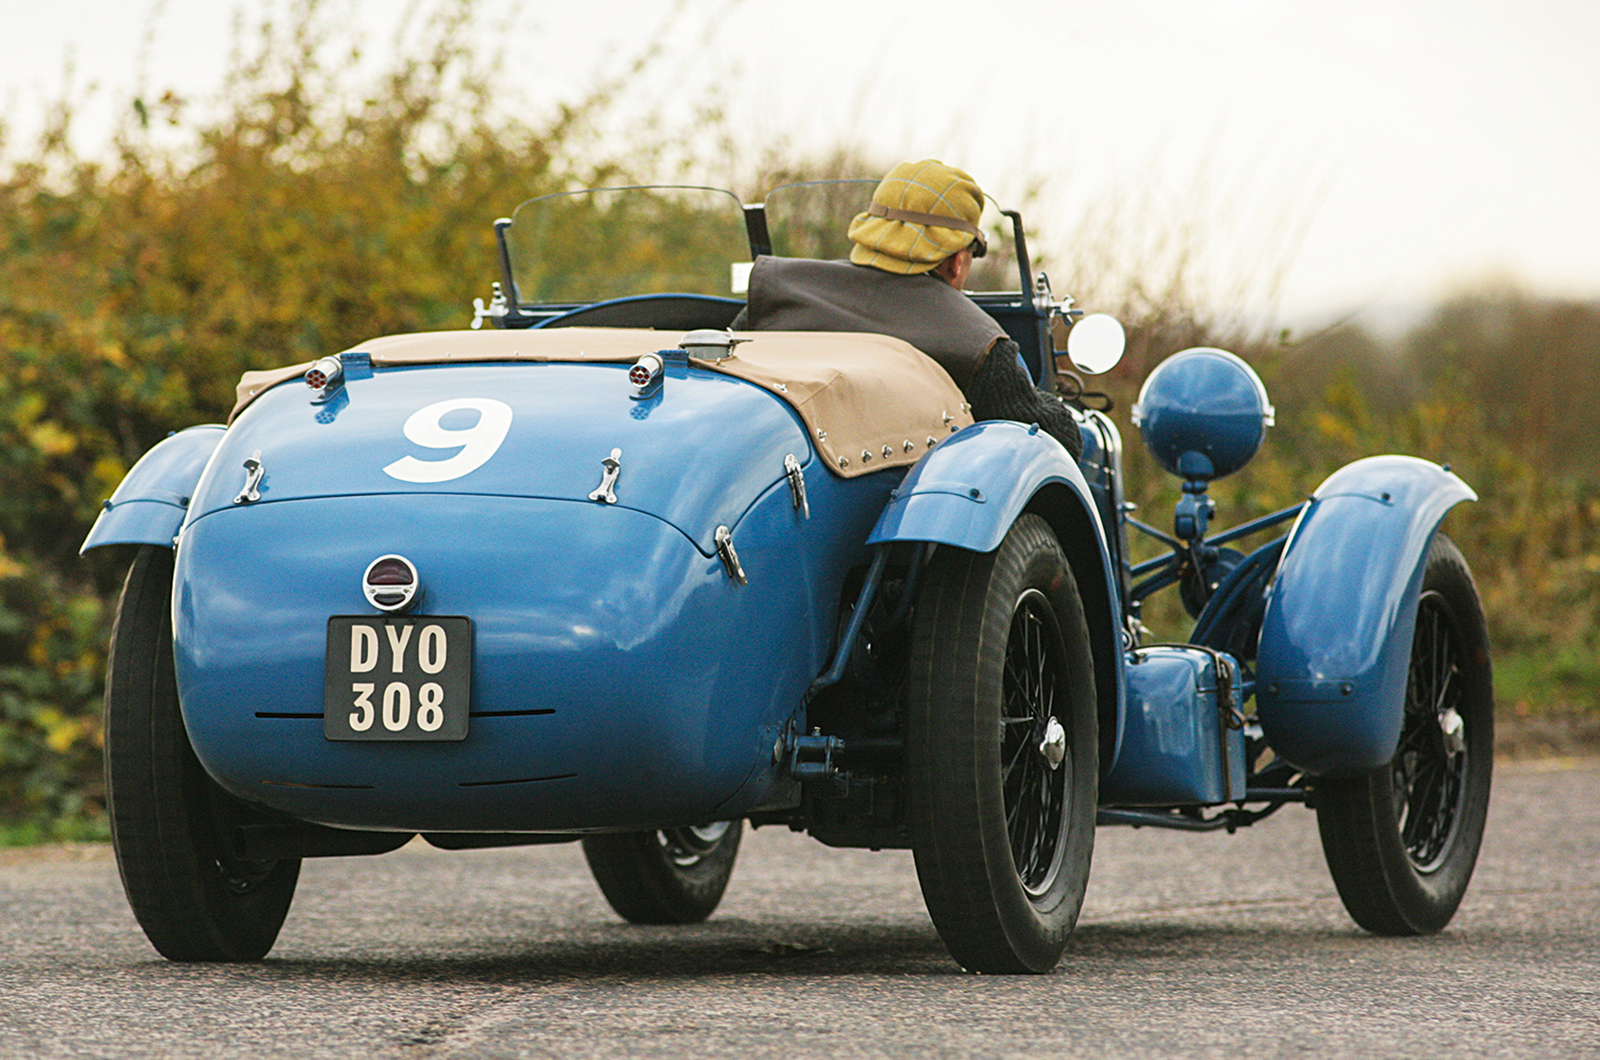 Classic & Sports Car – Alfa Romeo 8C-2300: the story of the ‘Wrigley Special’